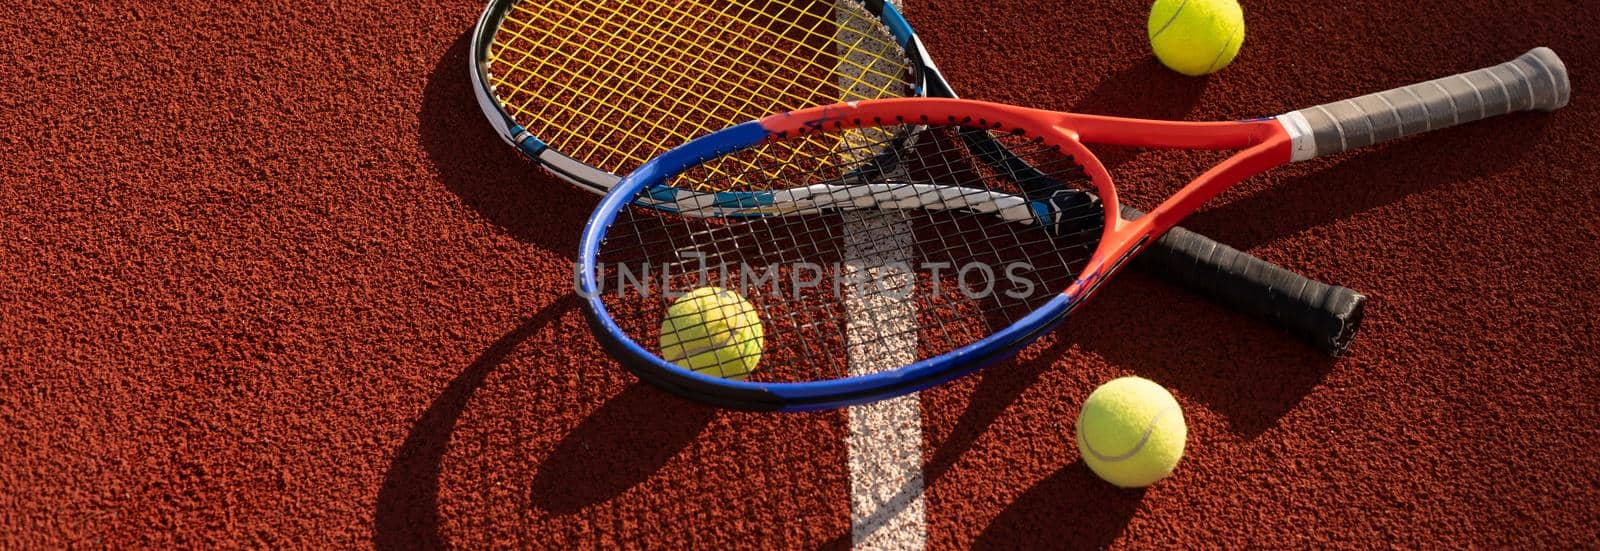 Close up view of two tennis rackets and balls on the tennis court